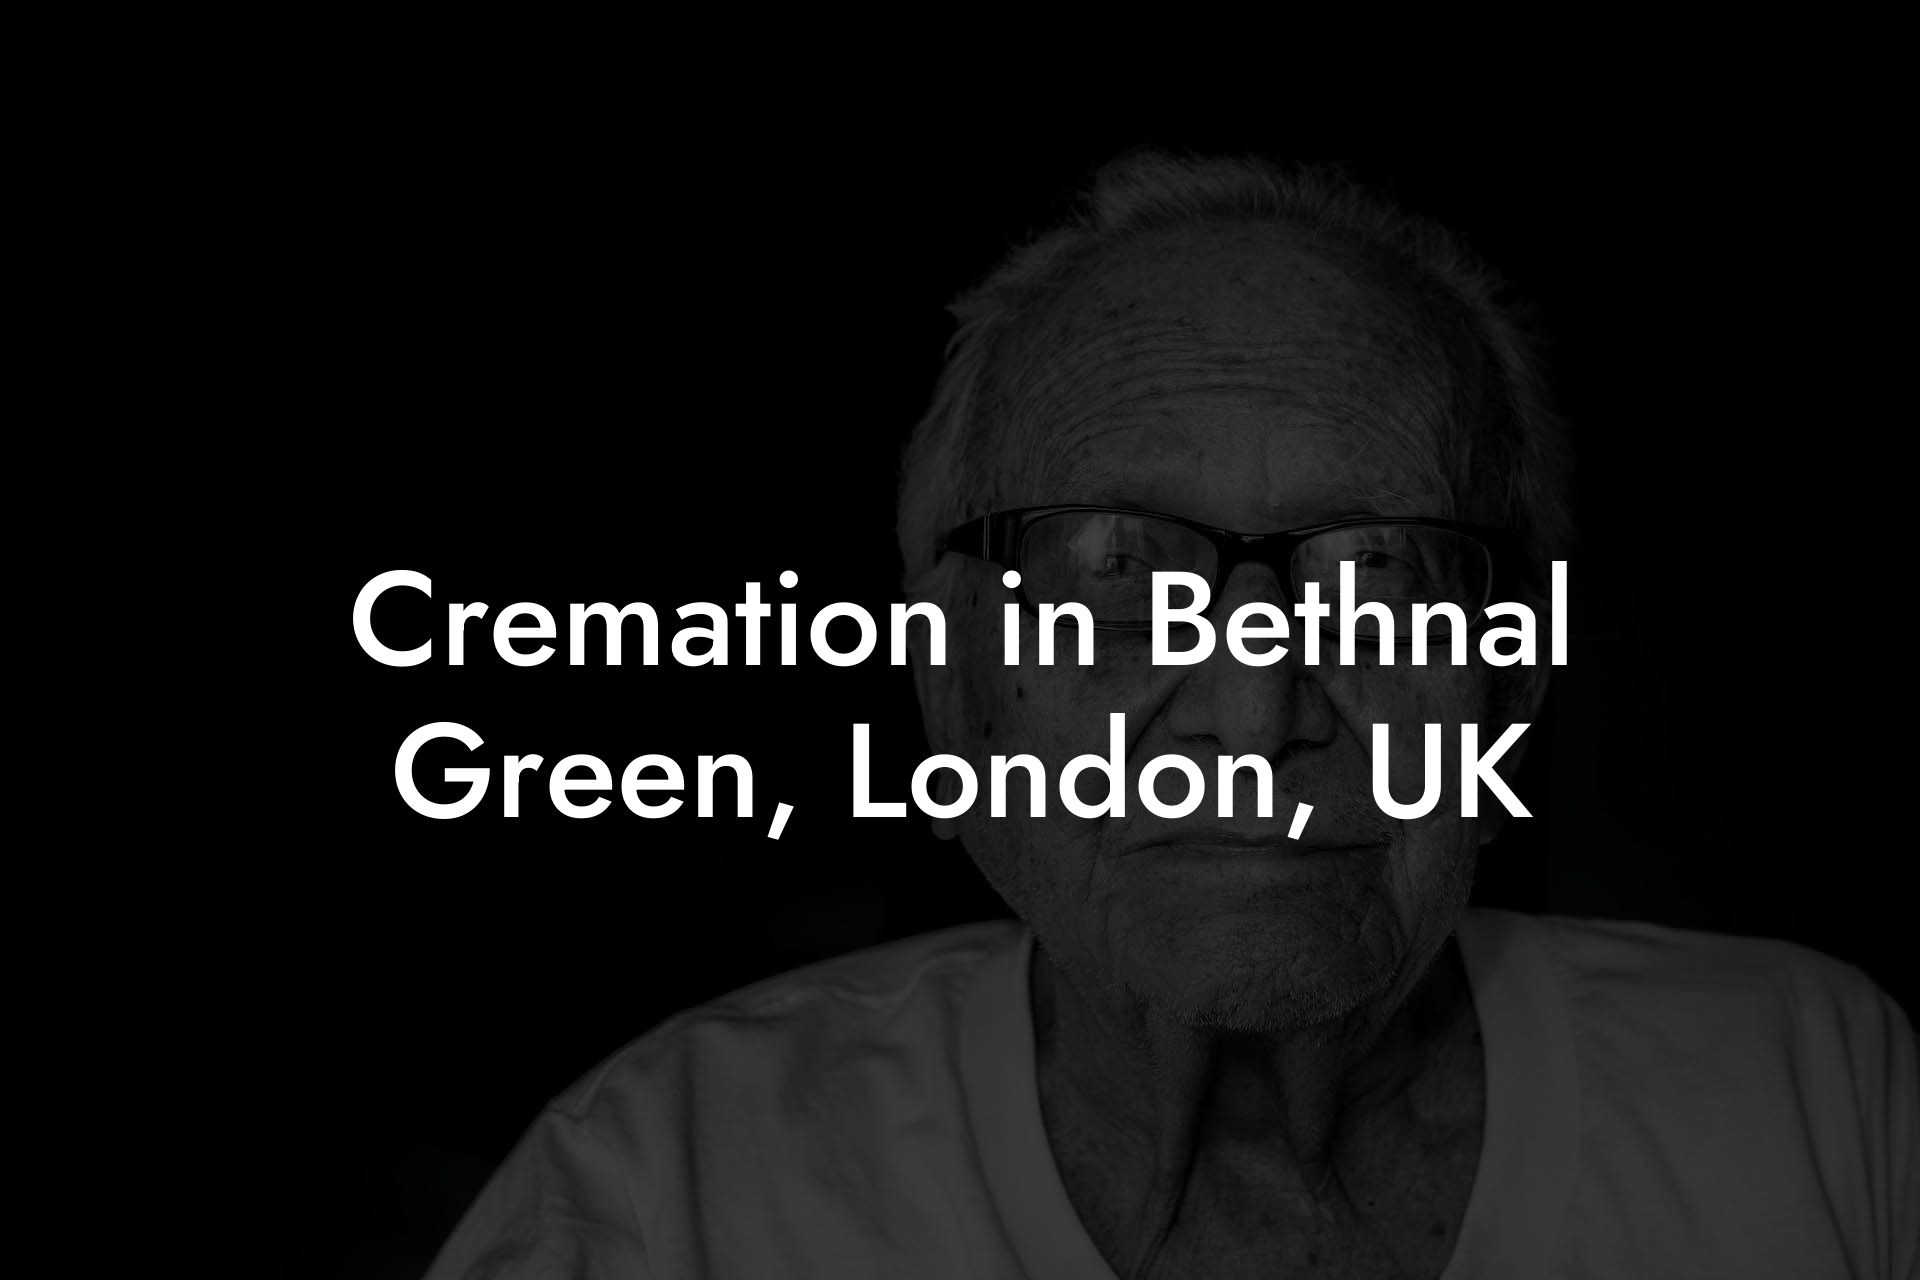 Cremation in Bethnal Green, London, UK